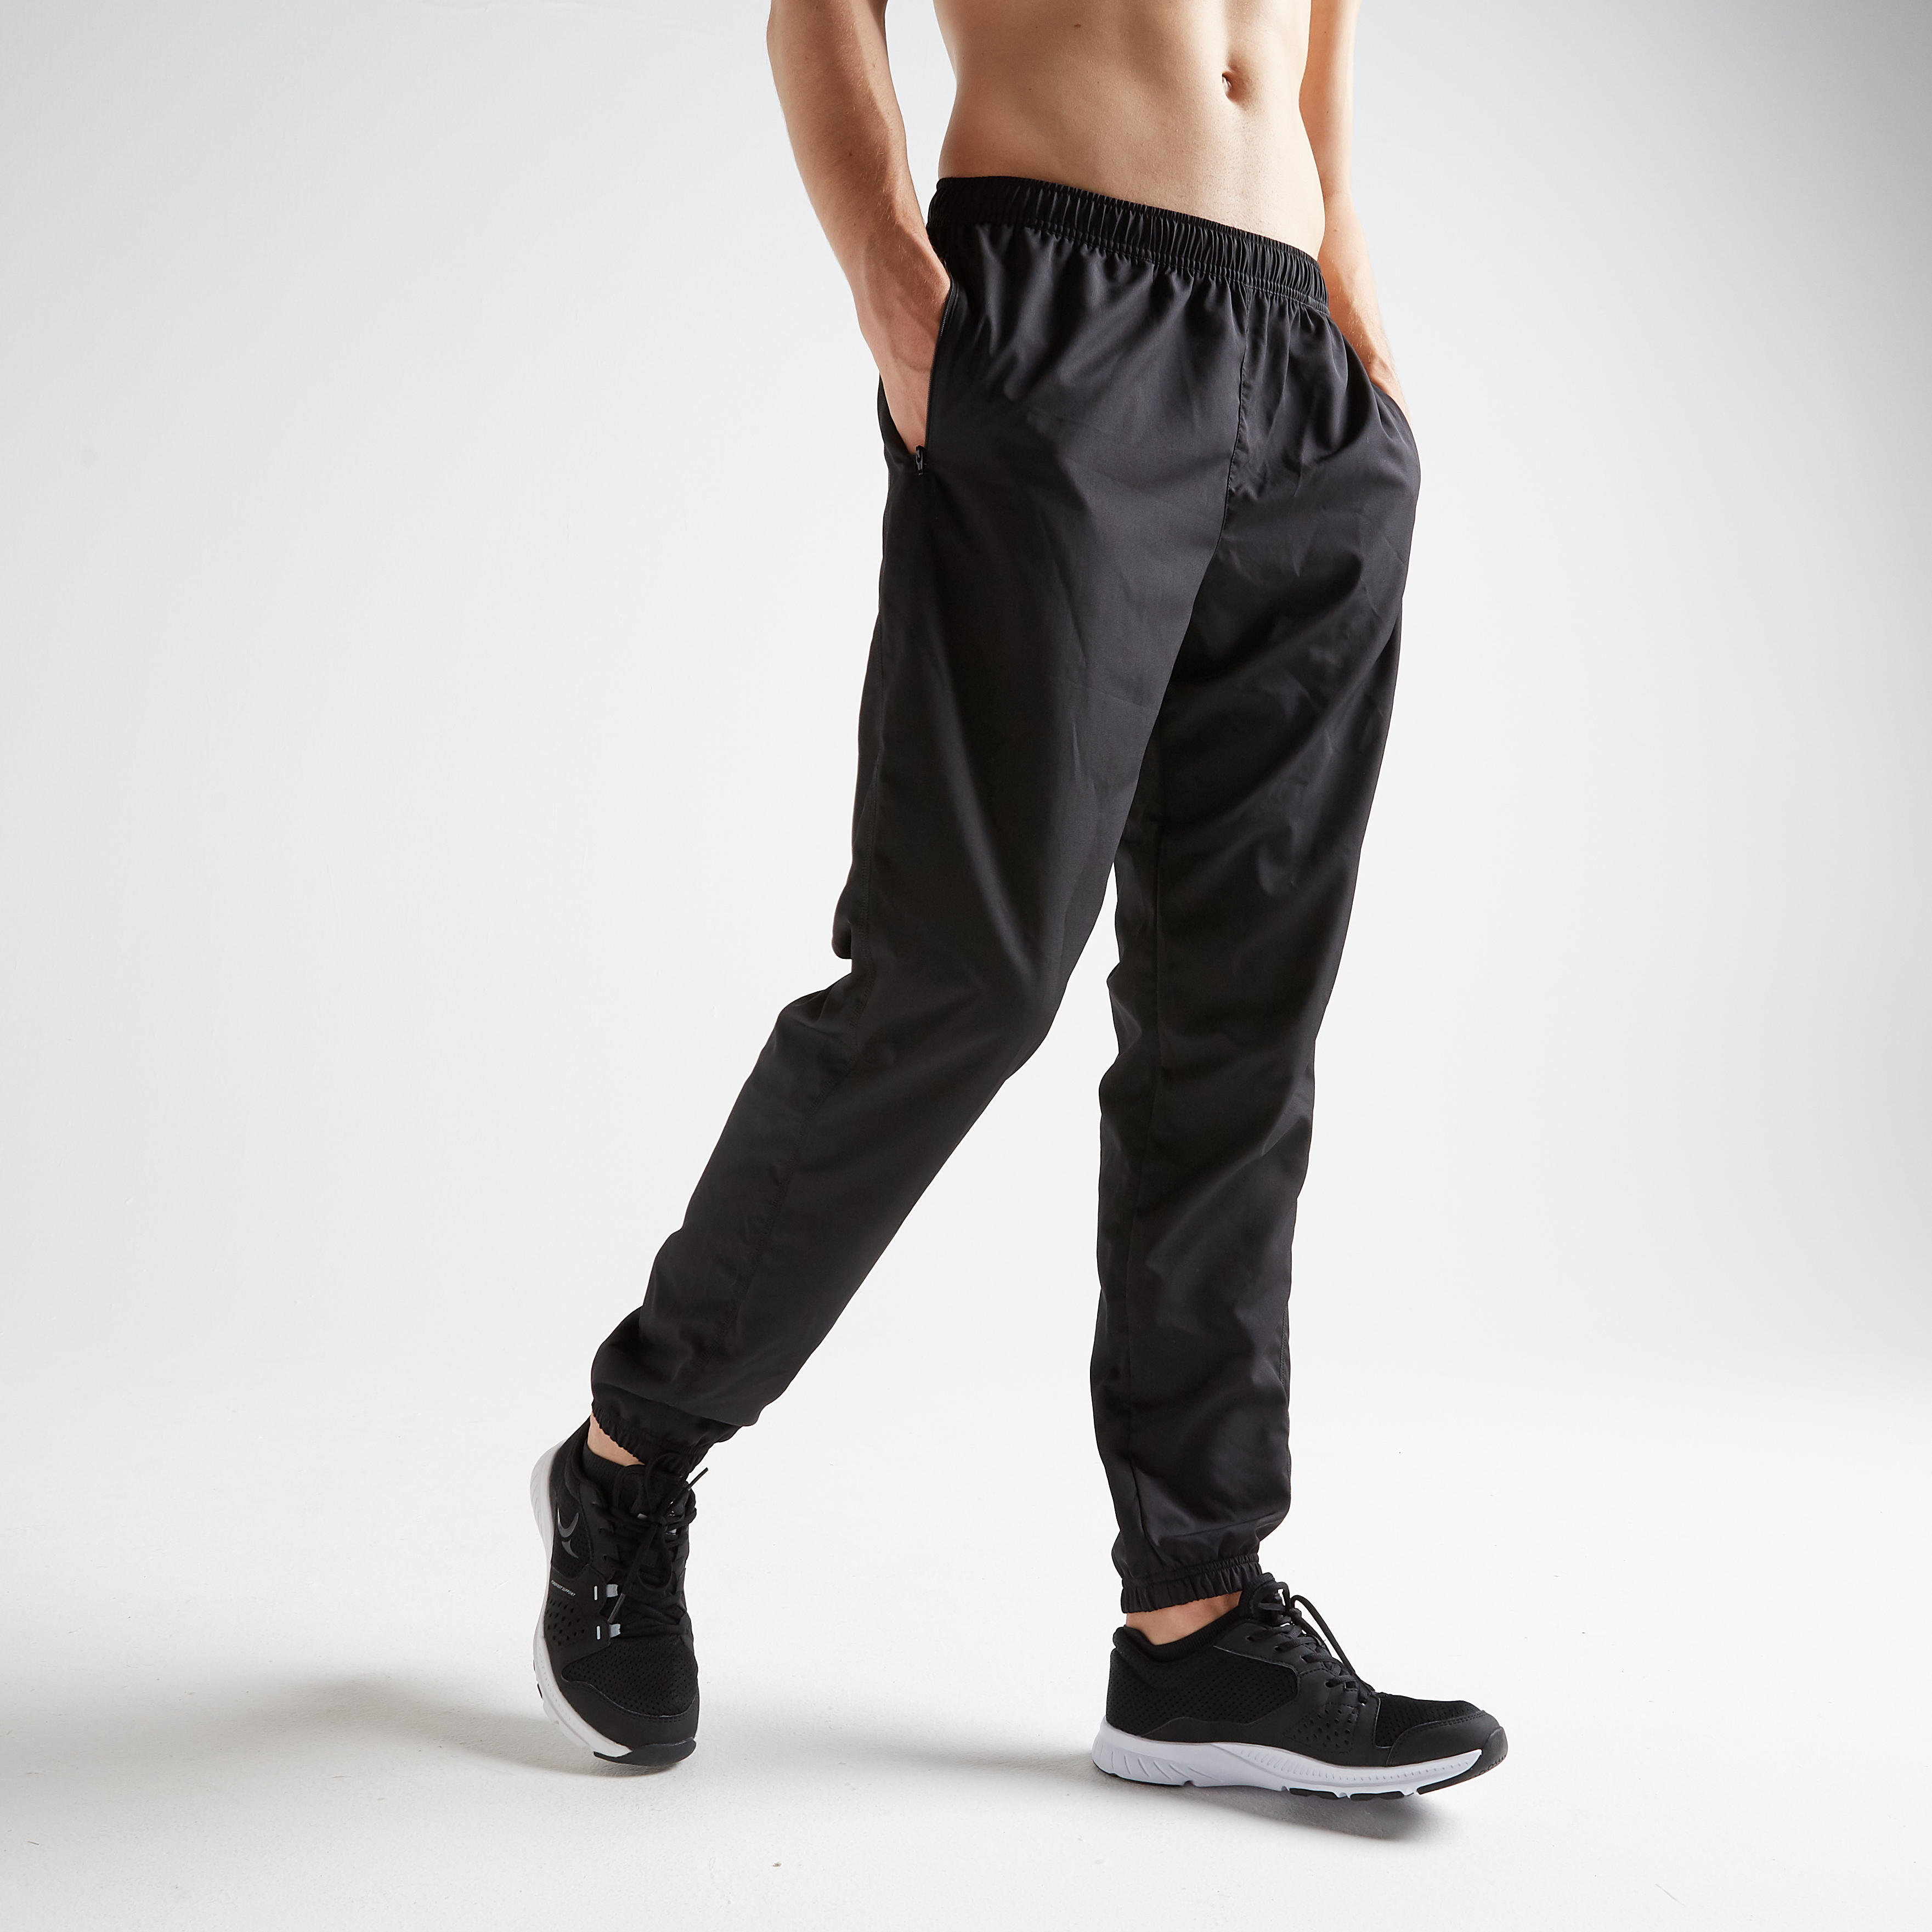 Tracksuits Buy Online at Decathlon India